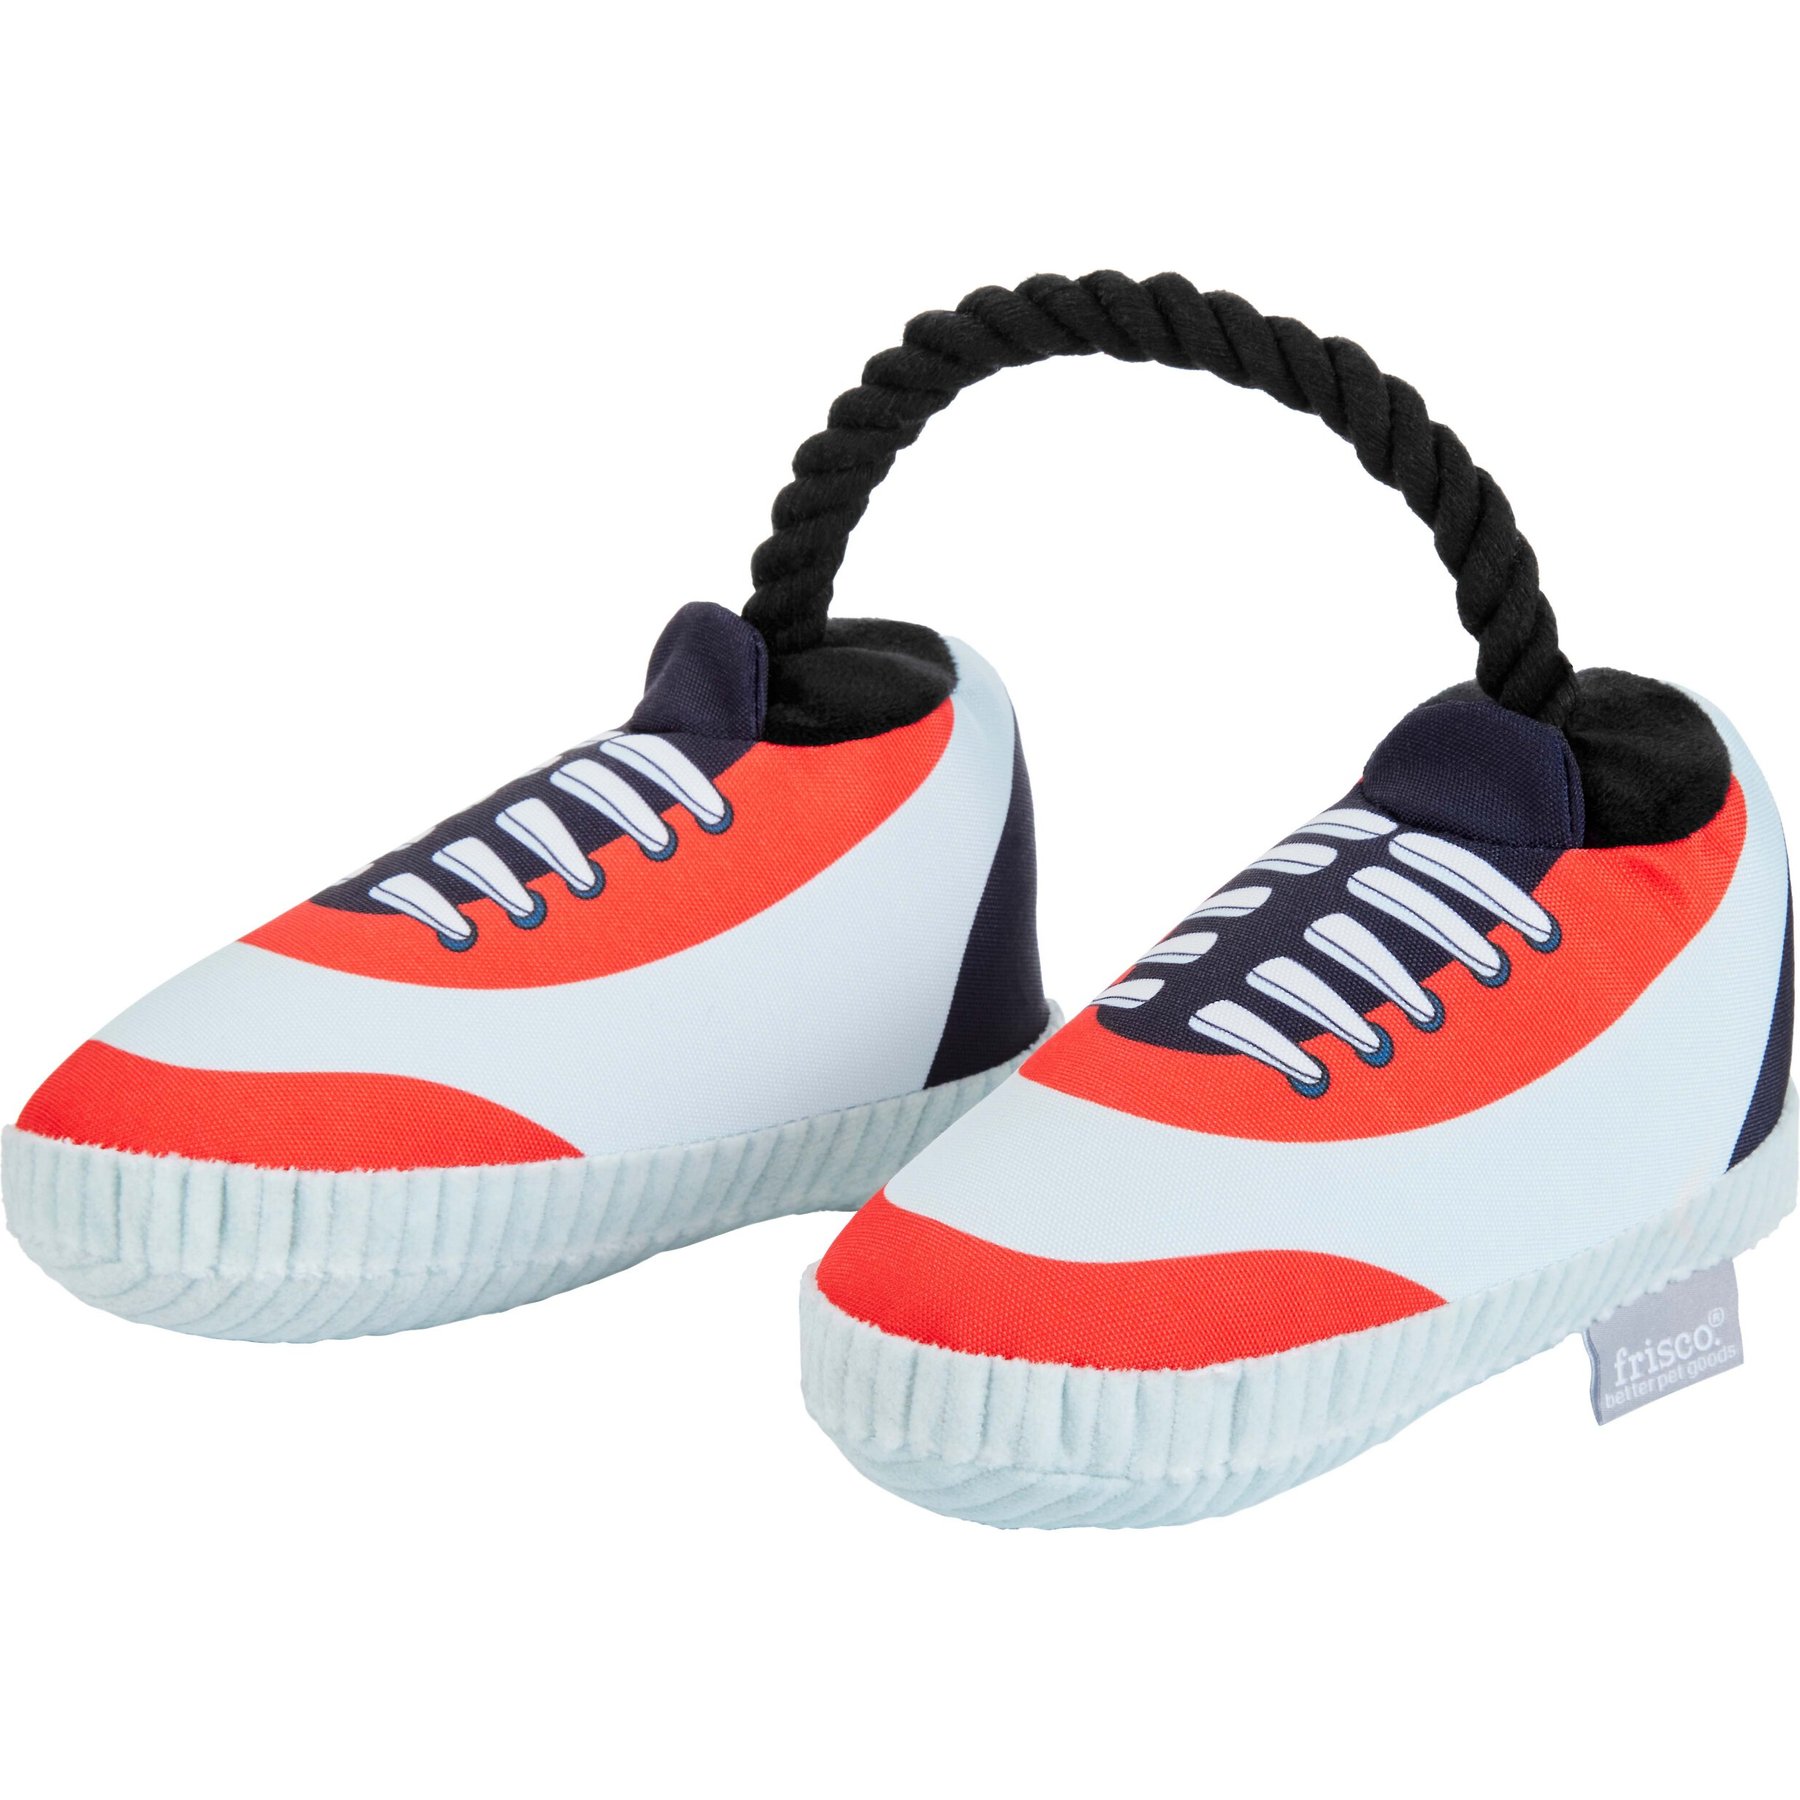 SNEAKERS SHOE INTERACTIVE DOG TOY